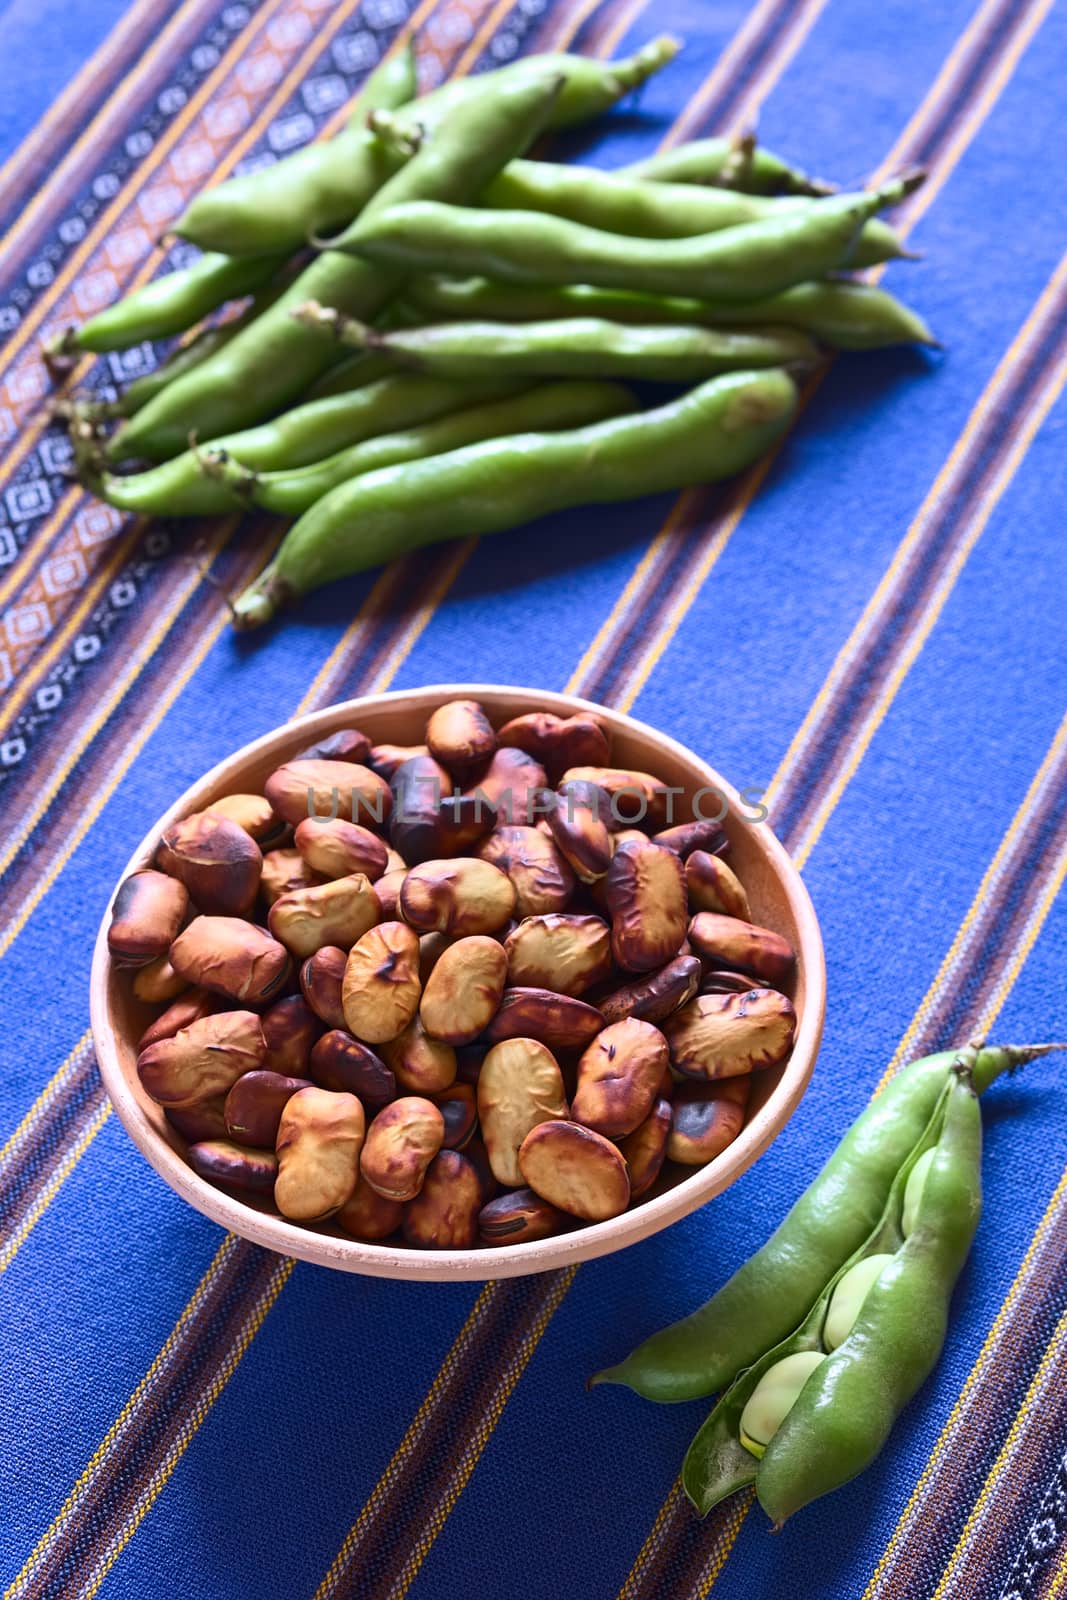 Roasted broad beans (lat. Vicia faba) eaten as snack in Bolivia in bowl with fresh broad bean pods on the side and in the back on blue fabric, photographed with natural light (Selective Focus, Focus one third into the roasted beans)